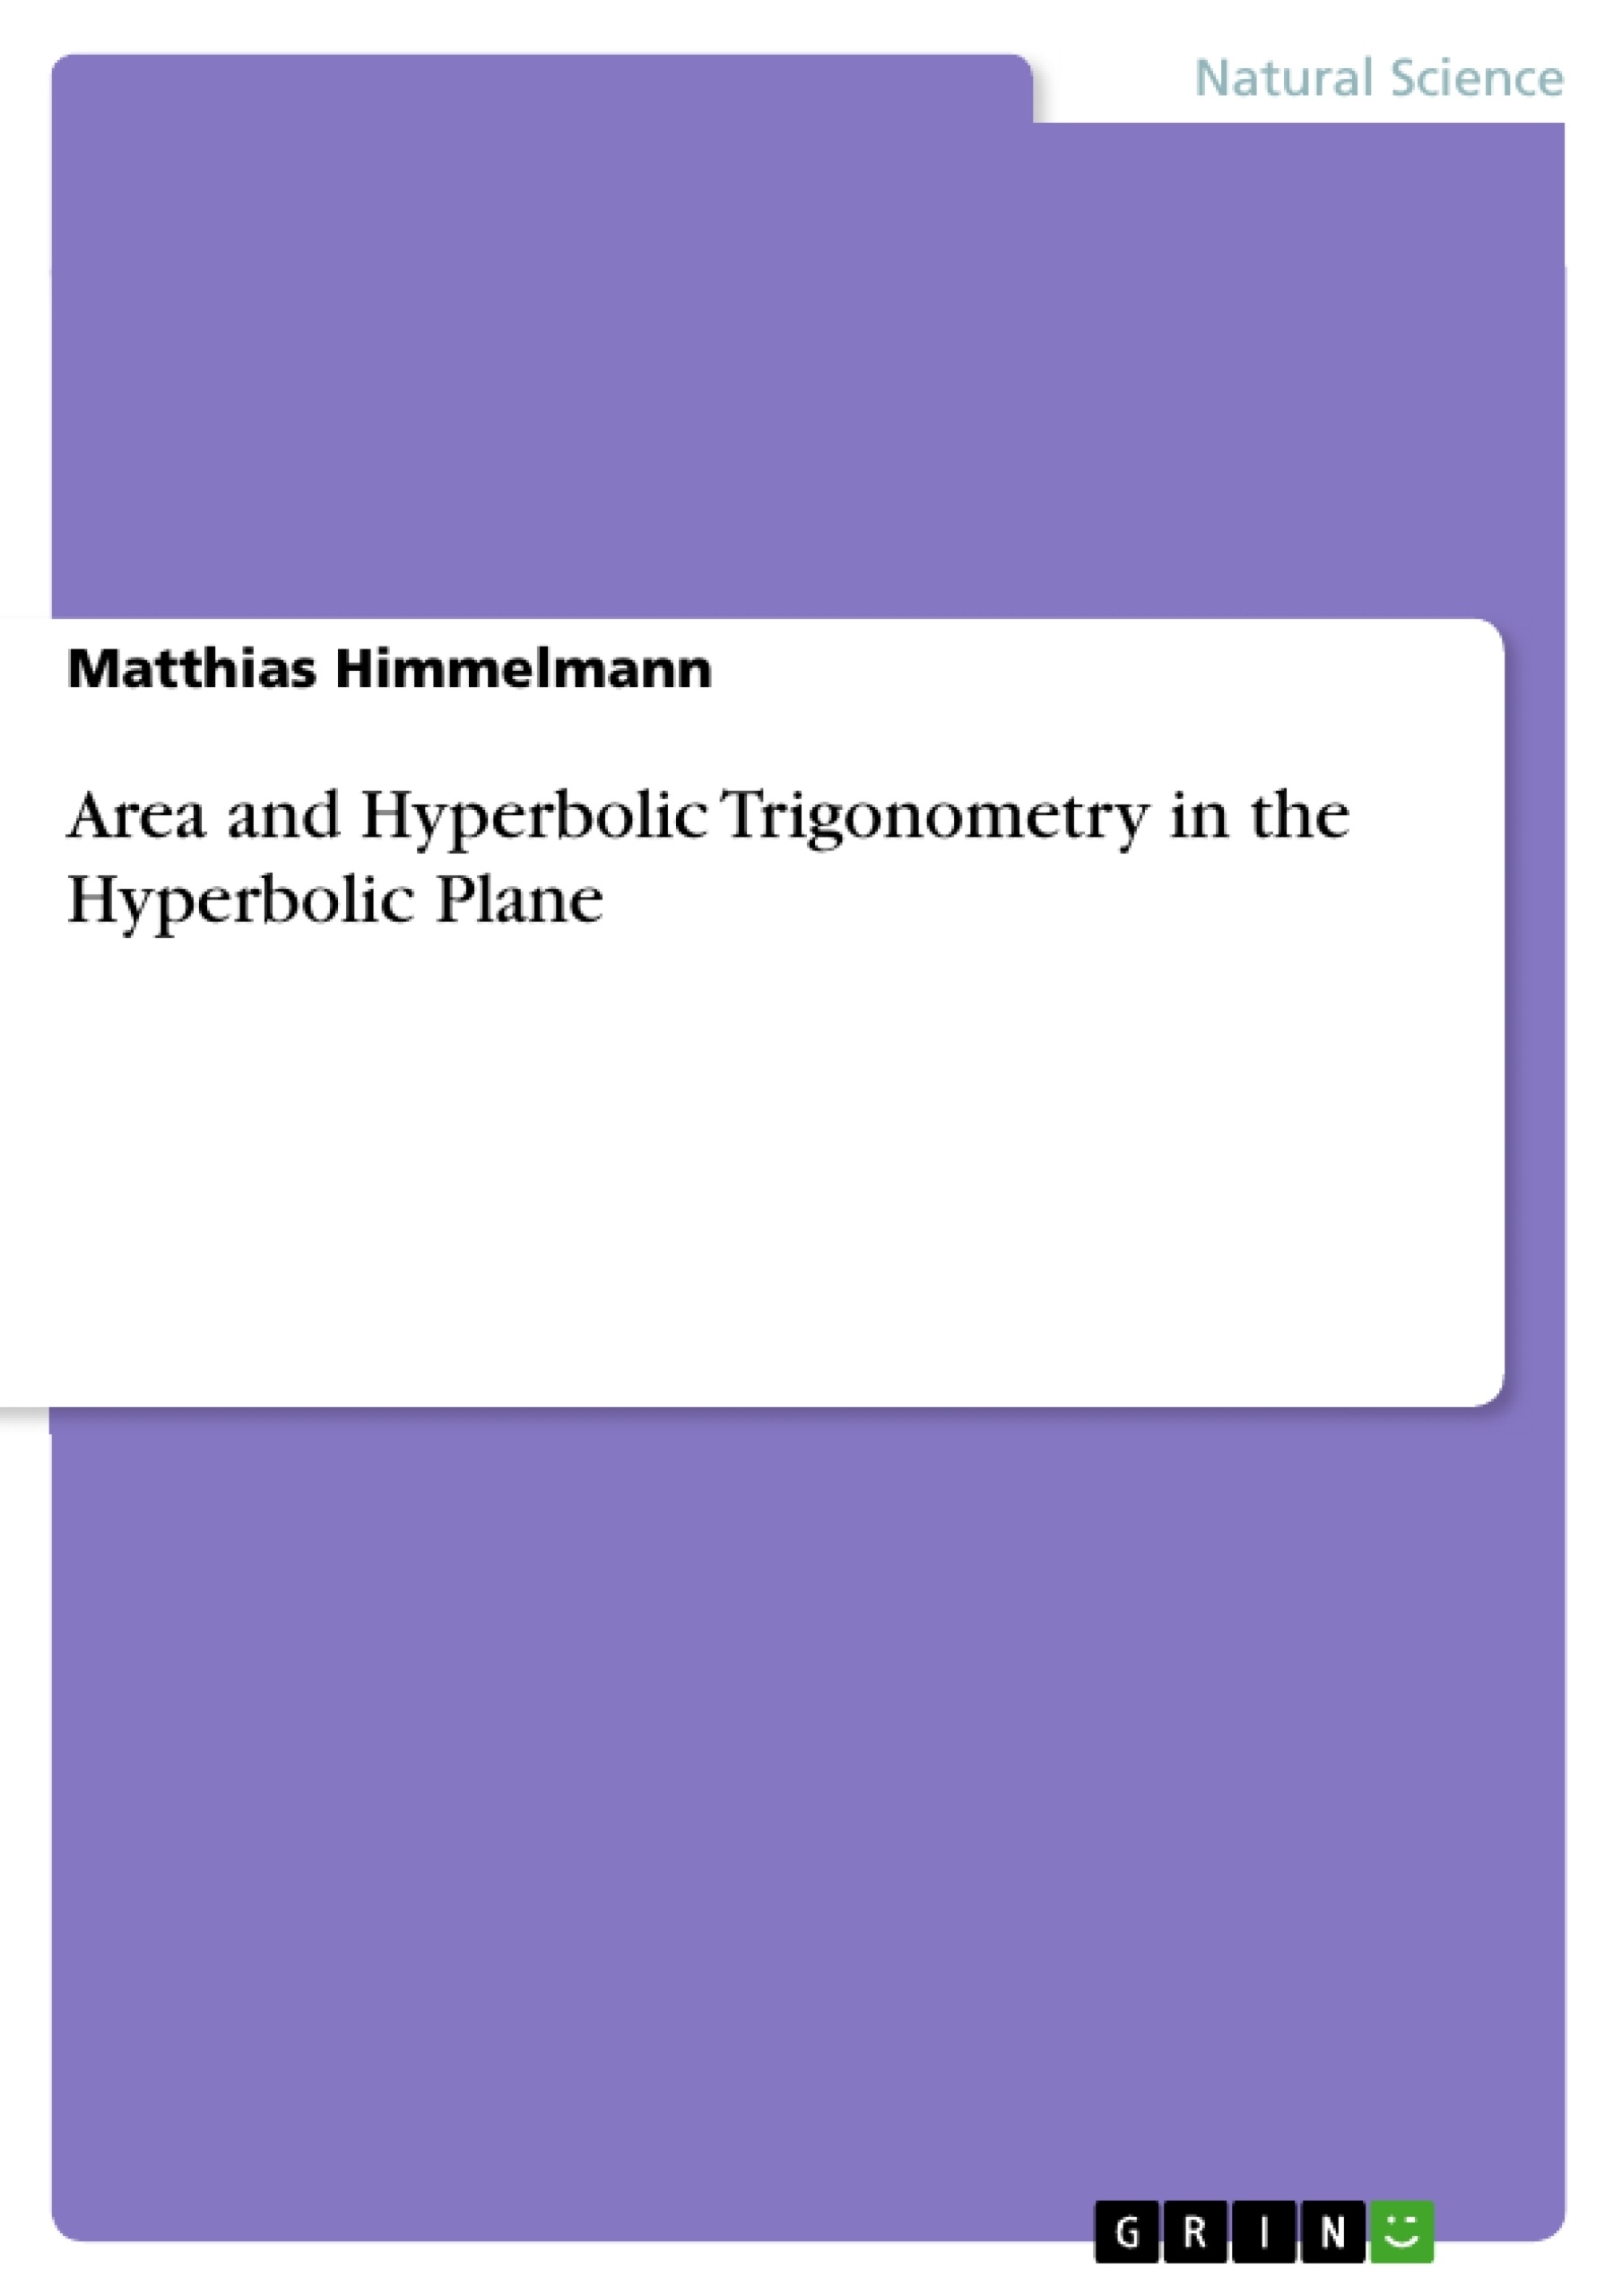 Titre: Area and Hyperbolic Trigonometry in the Hyperbolic Plane